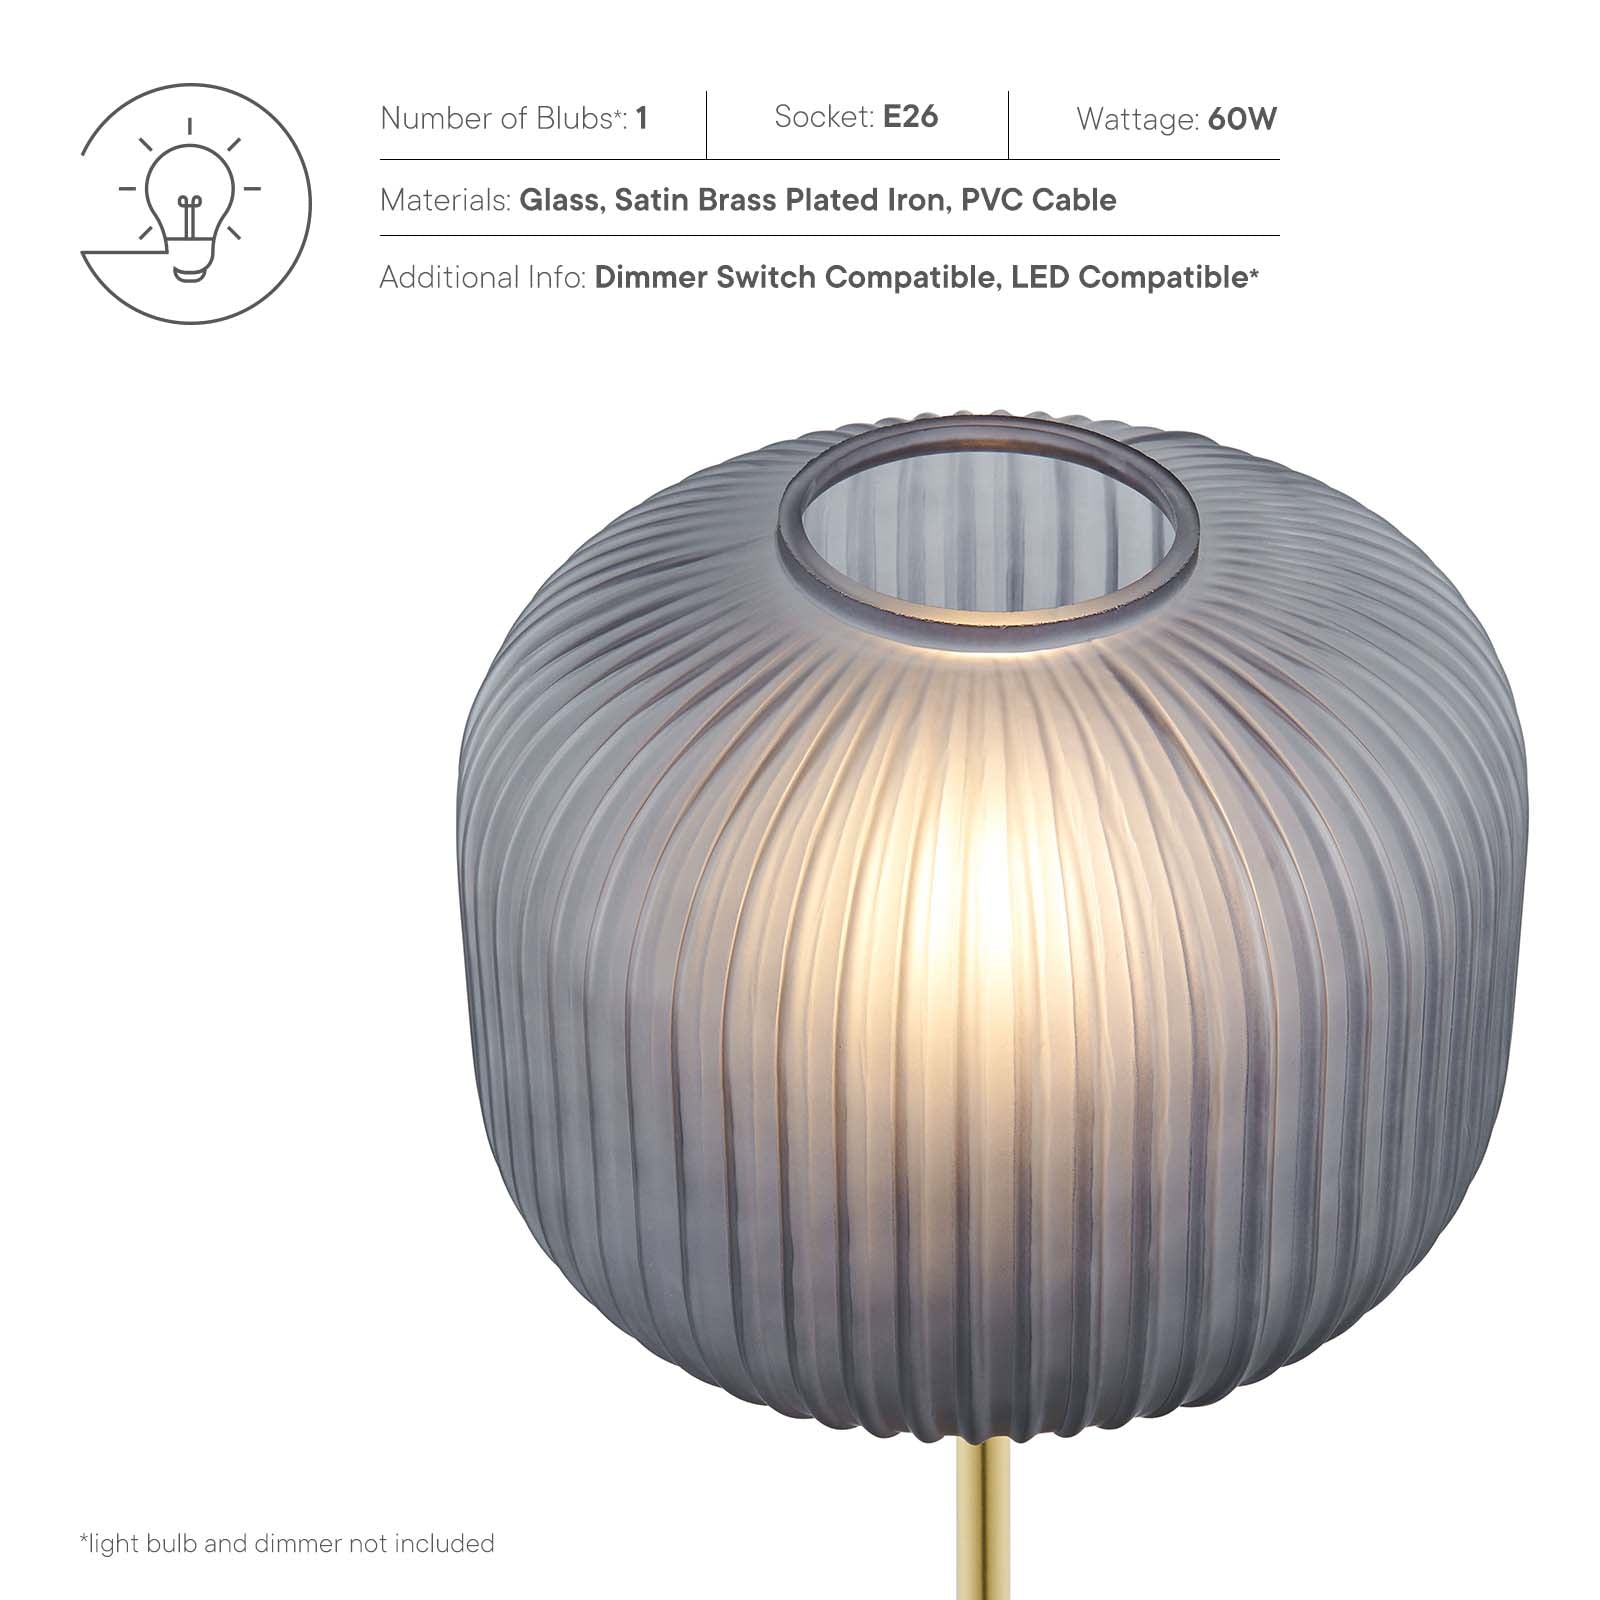 Reprise Glass Sphere Glass and Metal Table Lamp - East Shore Modern Home Furnishings